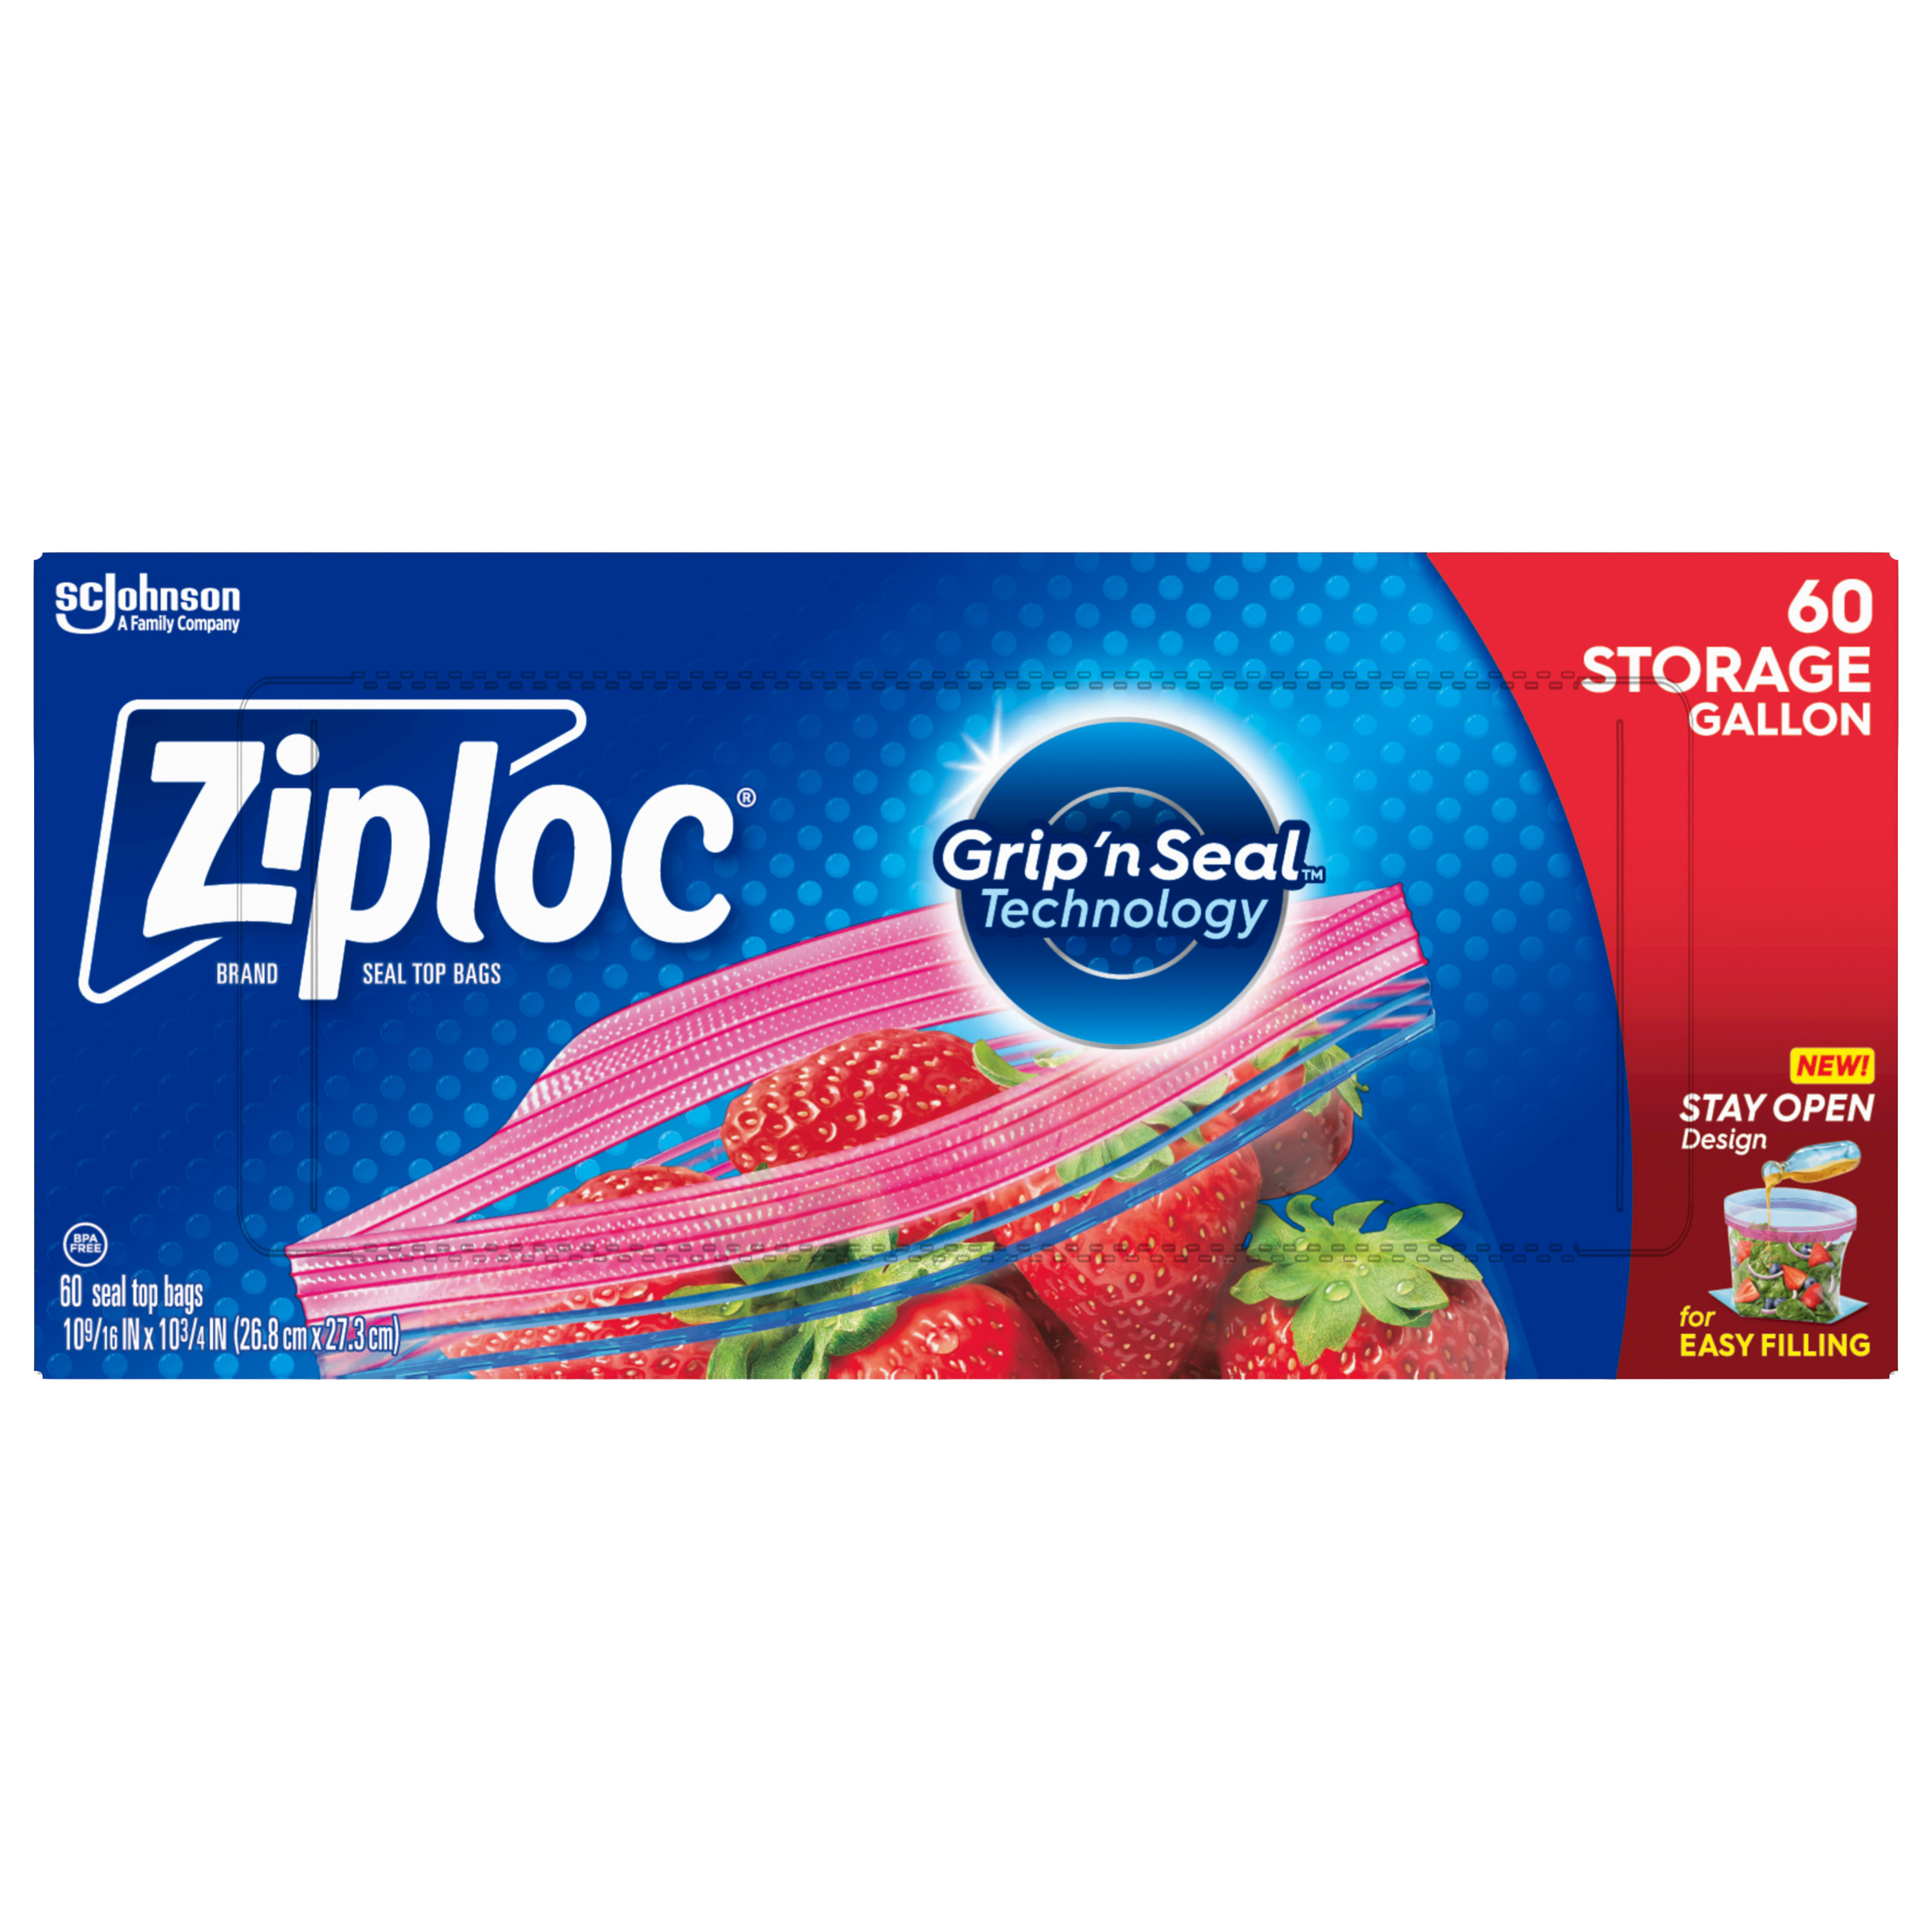 Ziploc® Brand Gallon Storage Bags with Stay Open Technology, 60 Count - image 1 of 19